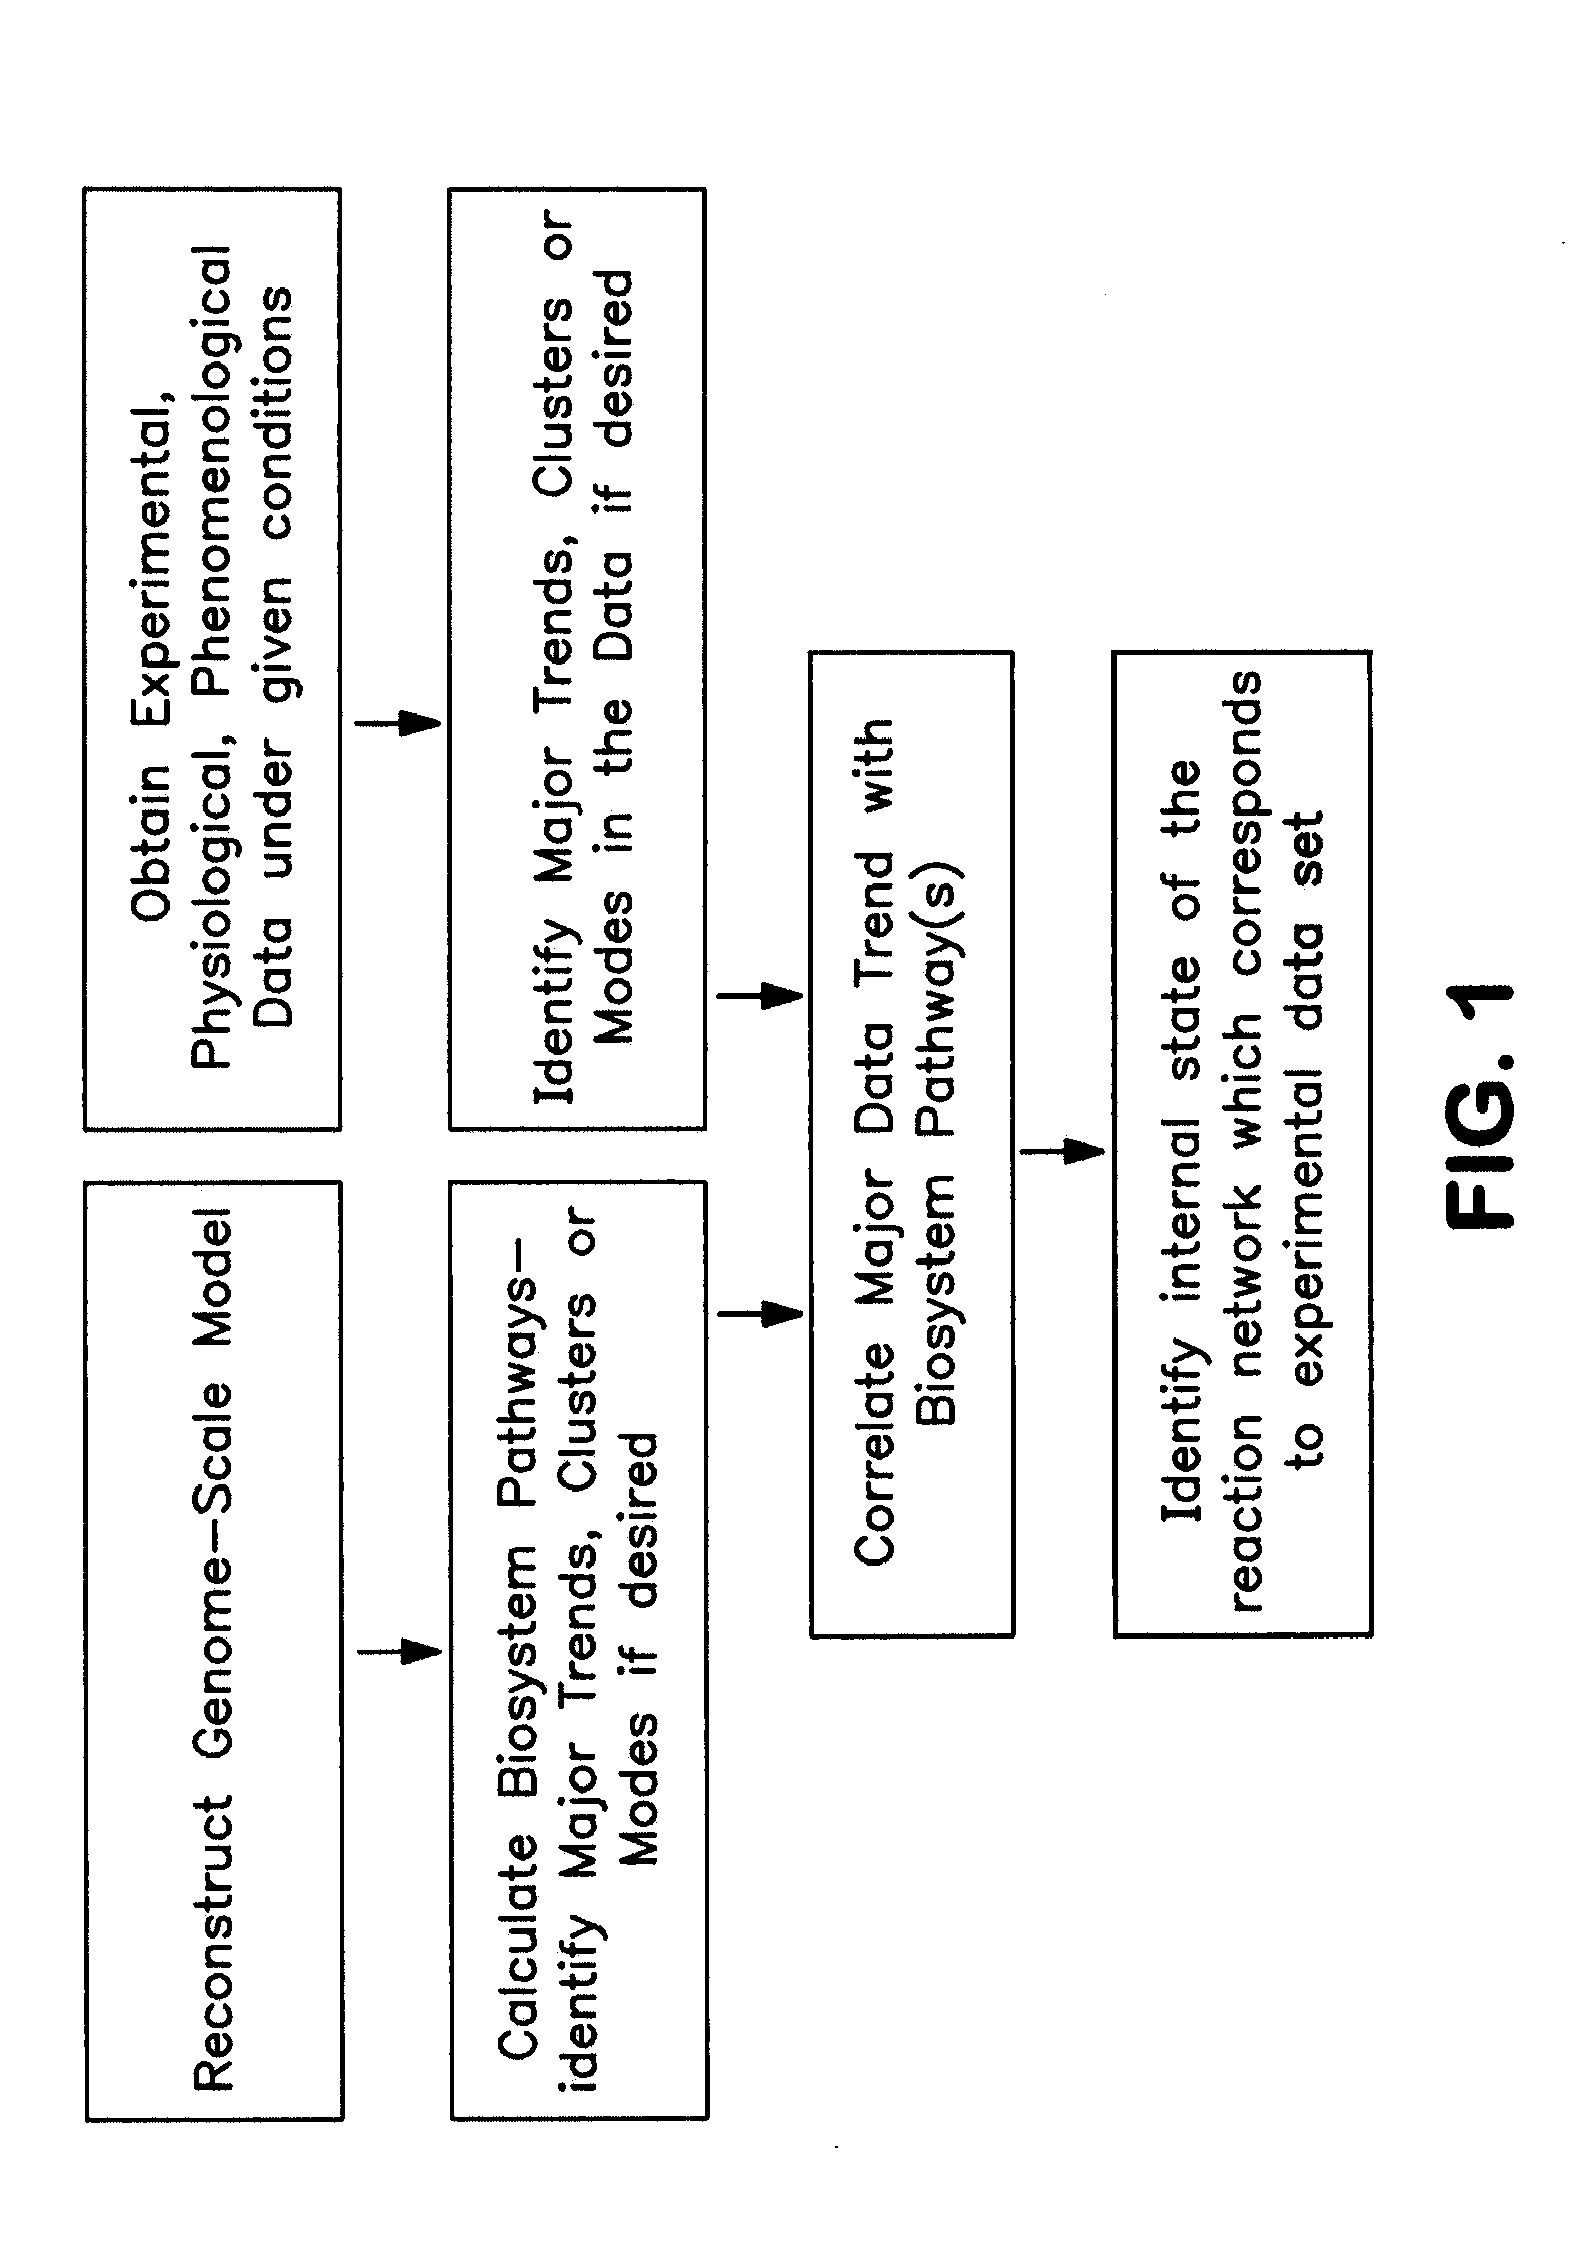 Methods and Systems to Identify Operational Reaction Pathways